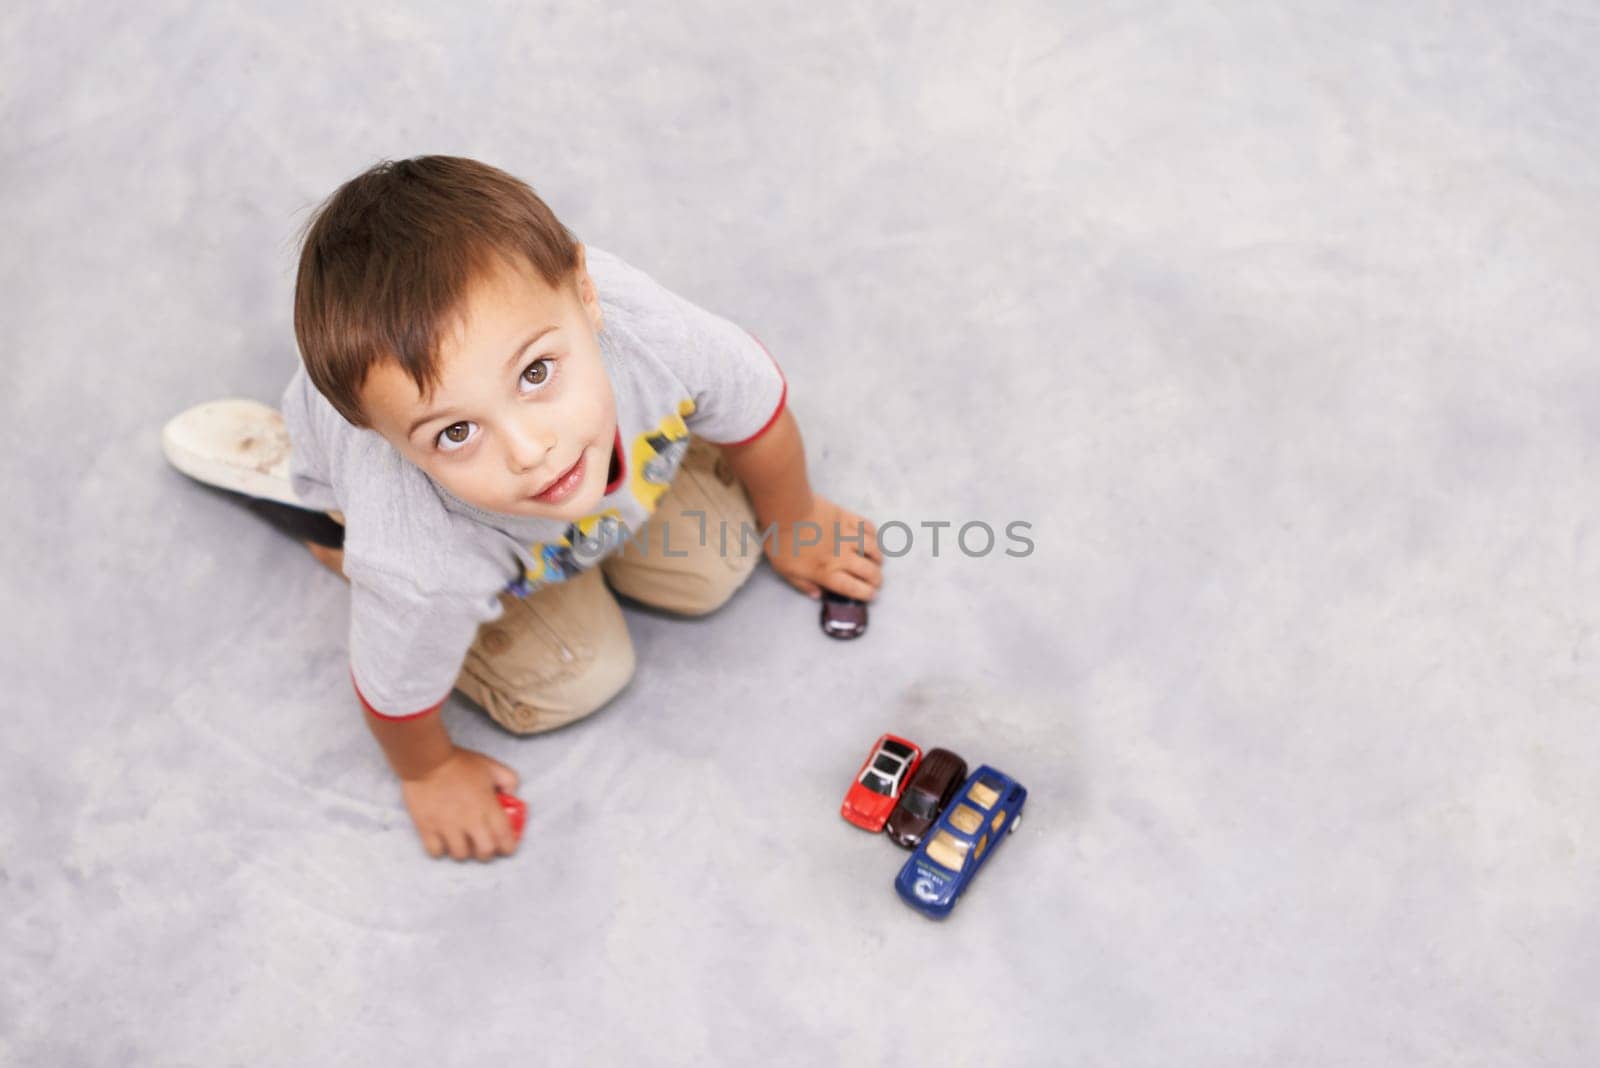 Car, toys and portrait of kid playing for learning, development and fun at modern home. Cute, top view and sweet young boy child enjoying game with vehicles on floor for childhood hobby at house